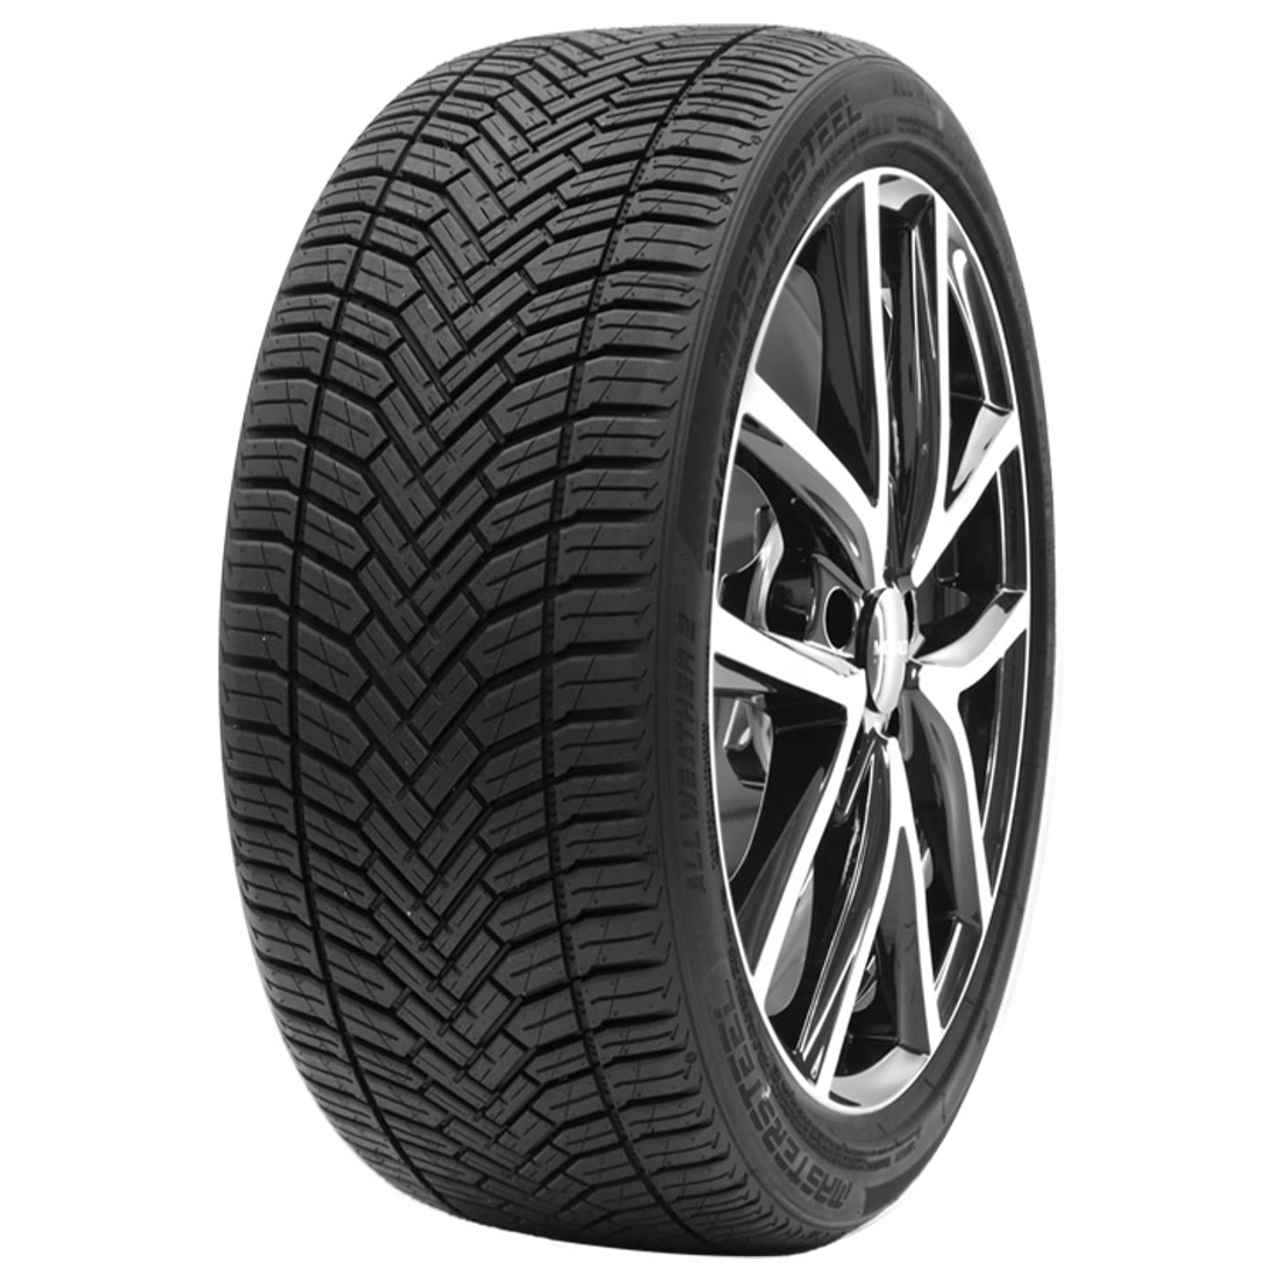 MASTERSTEEL ALL WEATHER 2 175/65R15 84H BSW